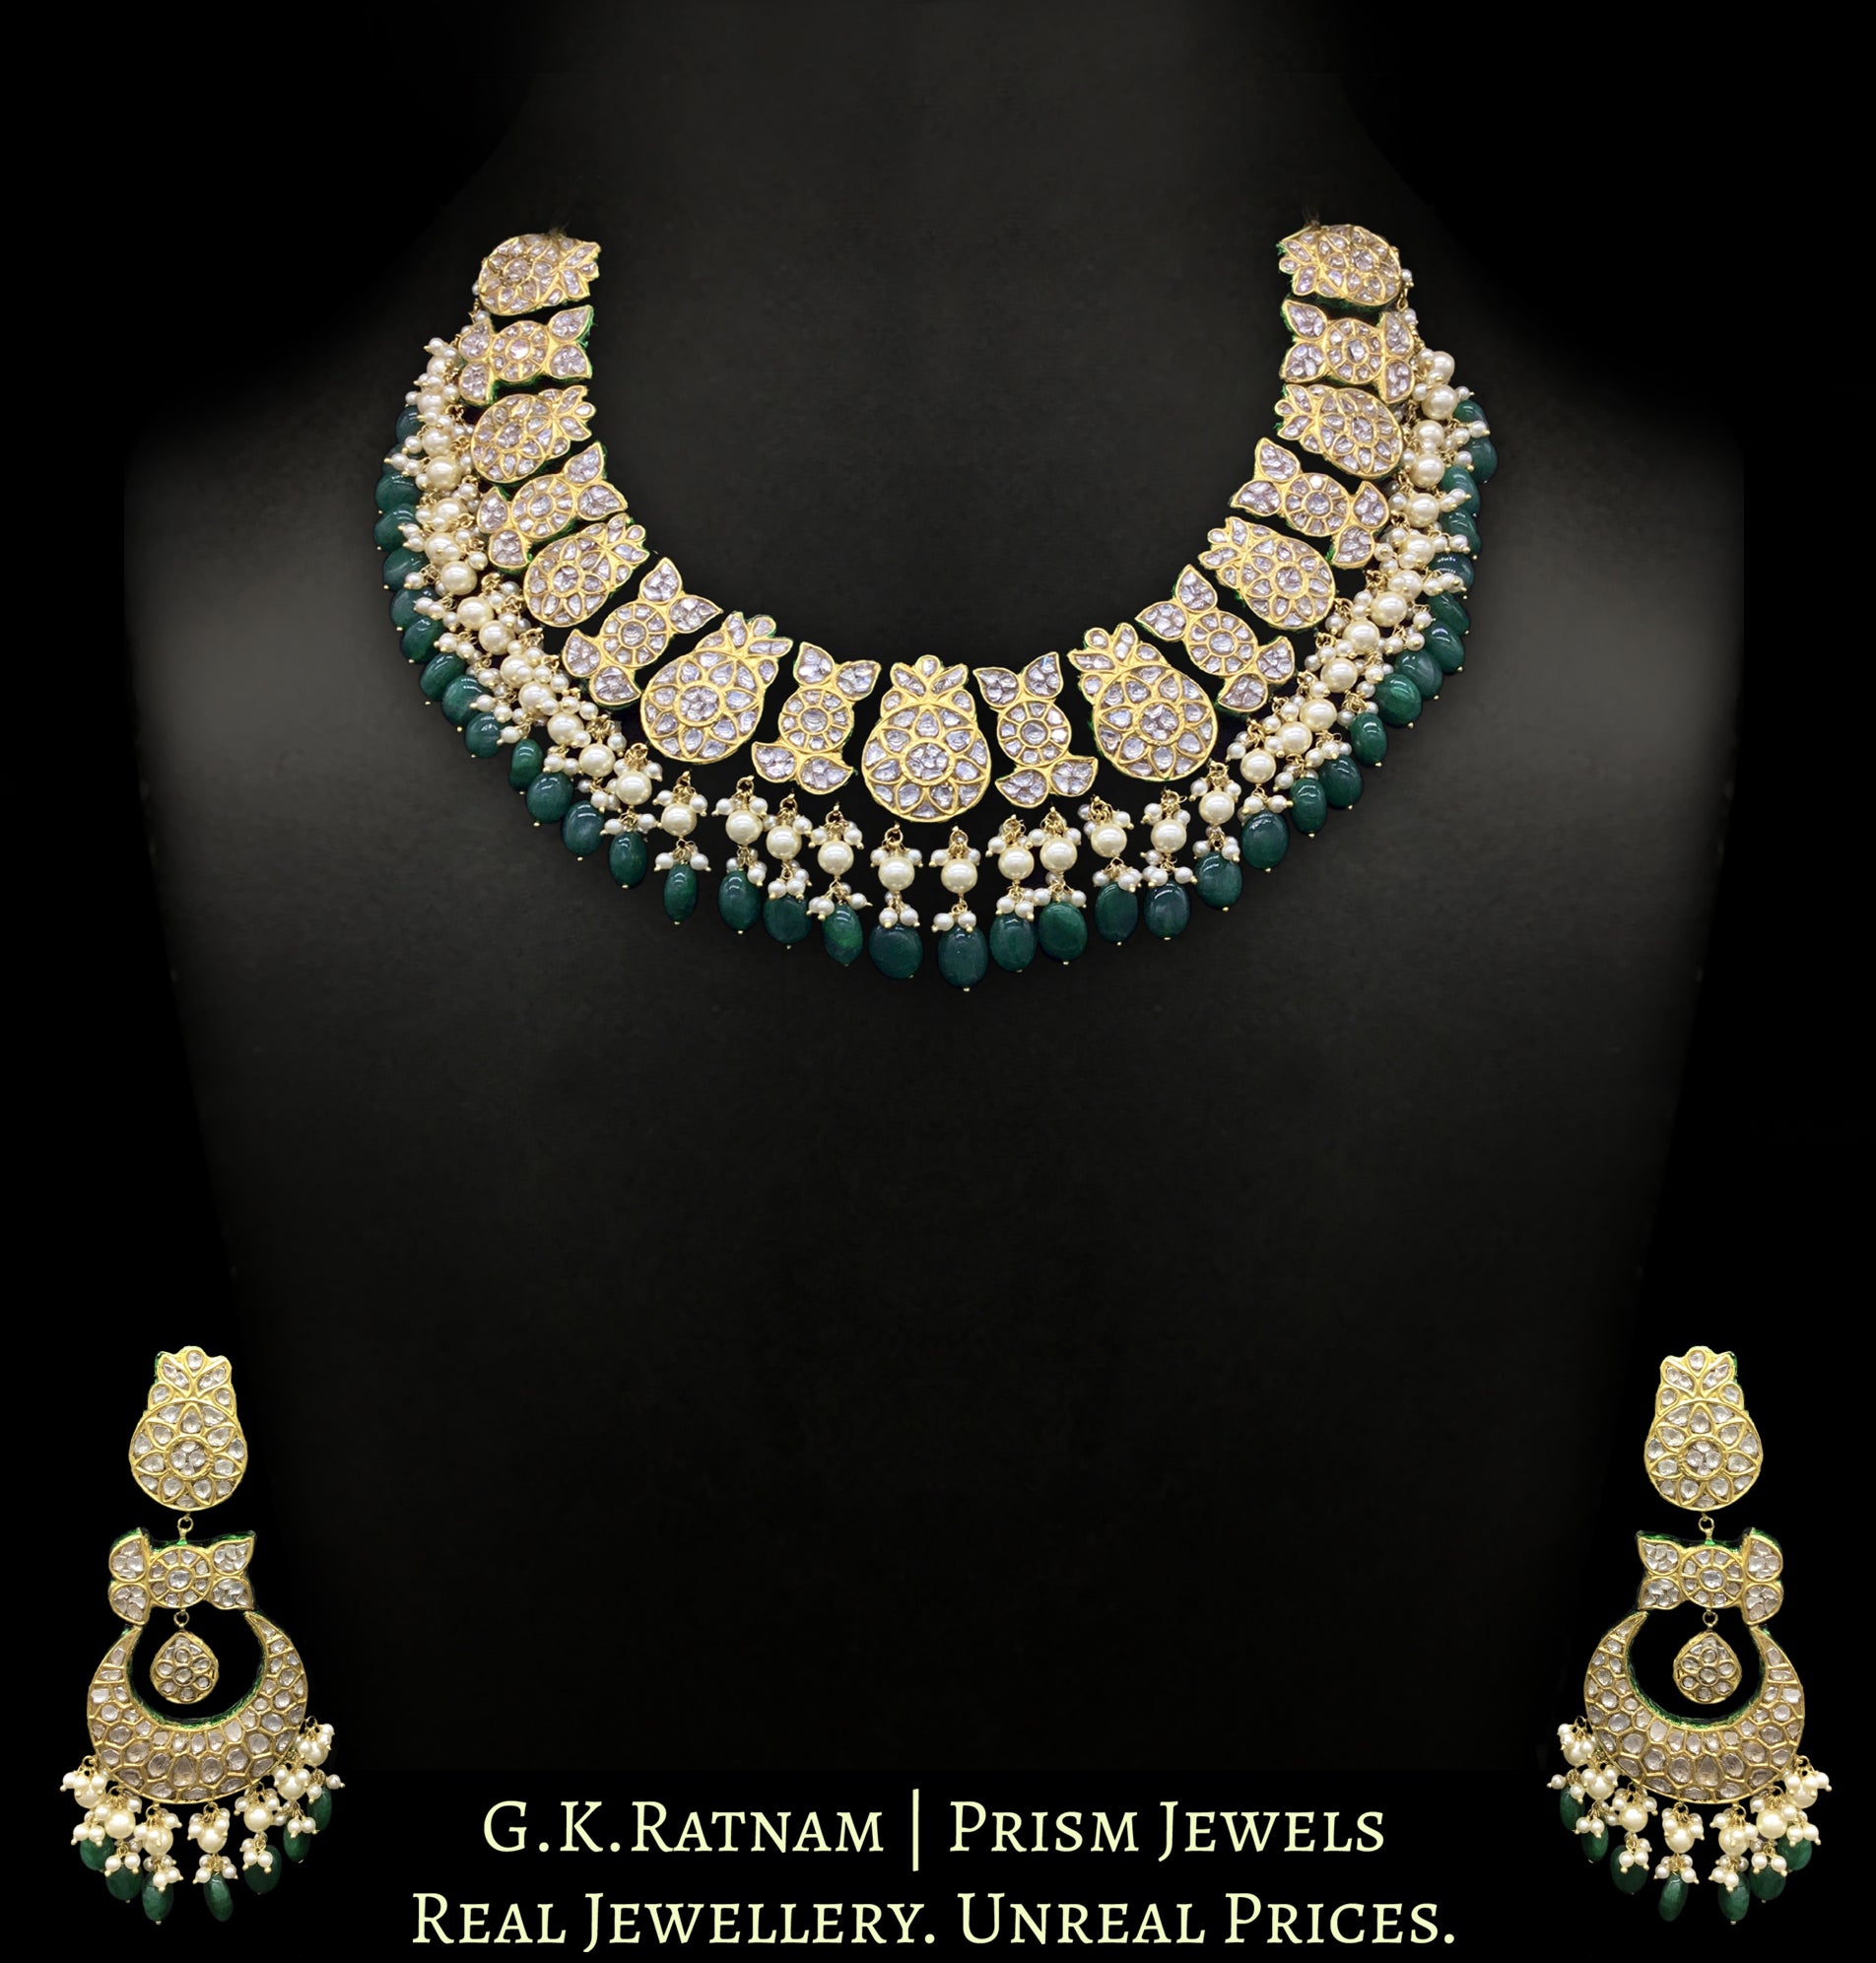 23k Gold and Diamond Polki Collar Necklace Set with emerald-grade green beryls and lustrous pearls